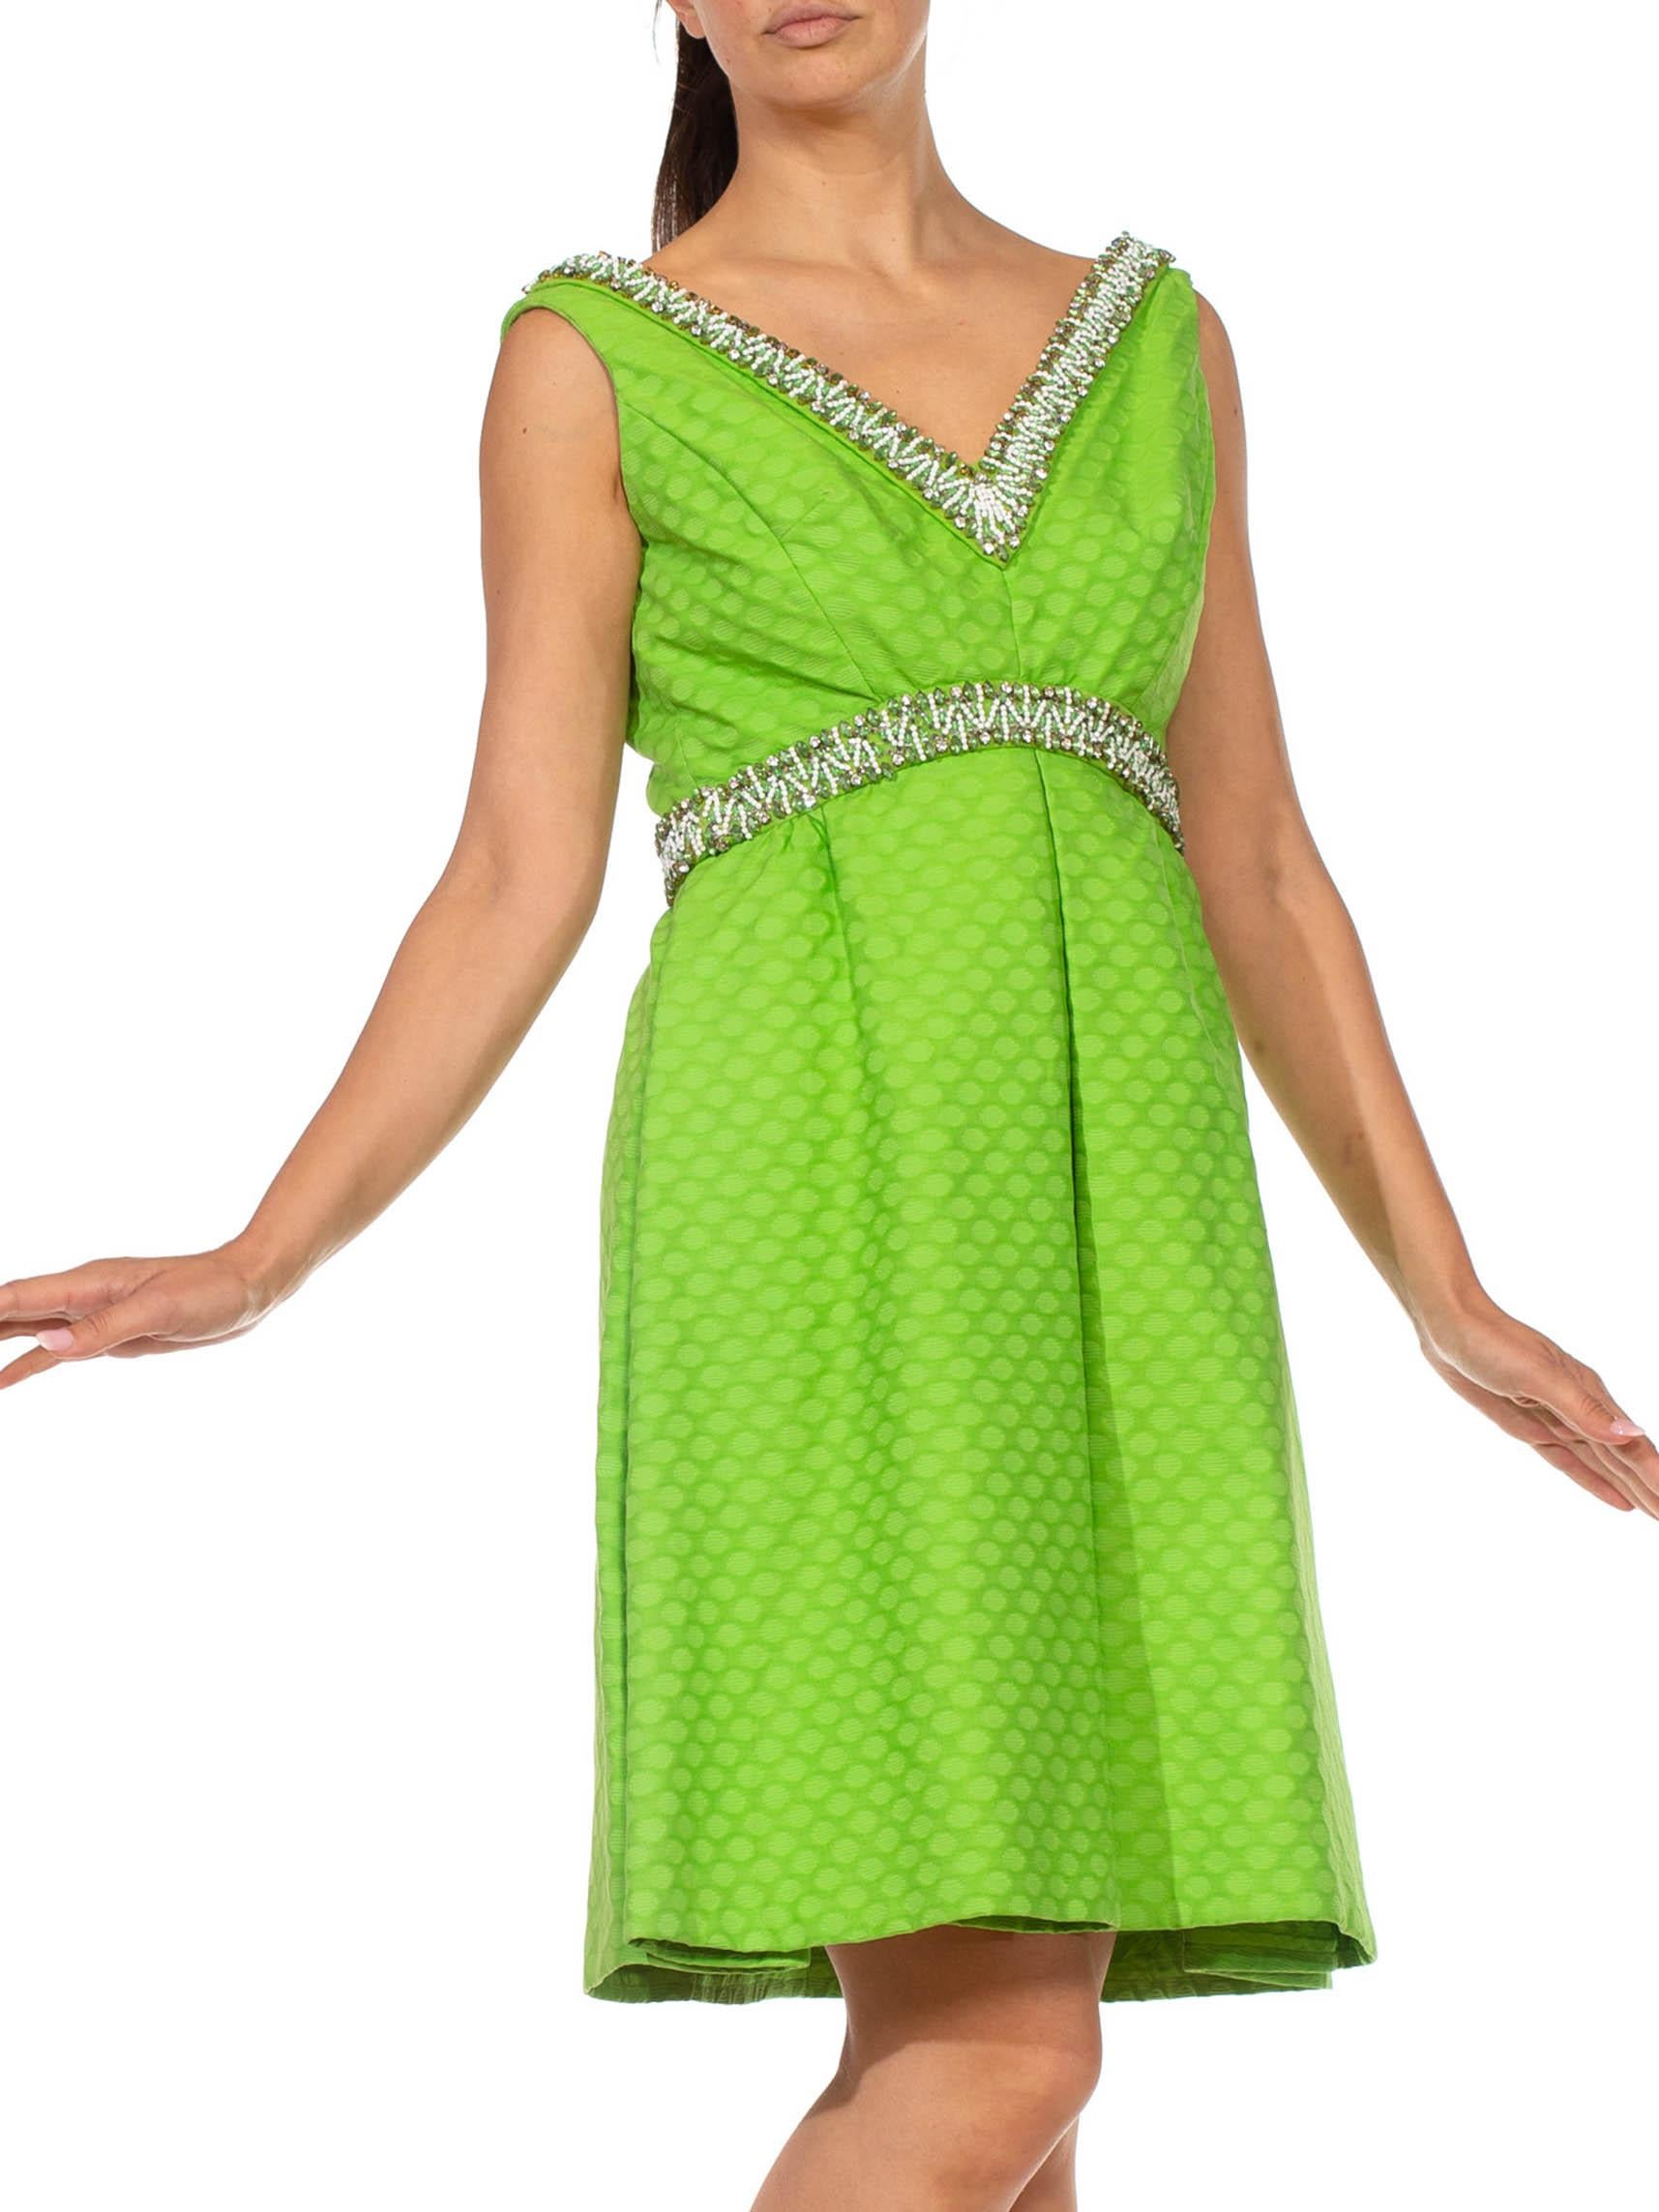 1960S Lime Green Cotton Jacquard Cocktail Dress With Beaded Neckline And Waist In Excellent Condition For Sale In New York, NY